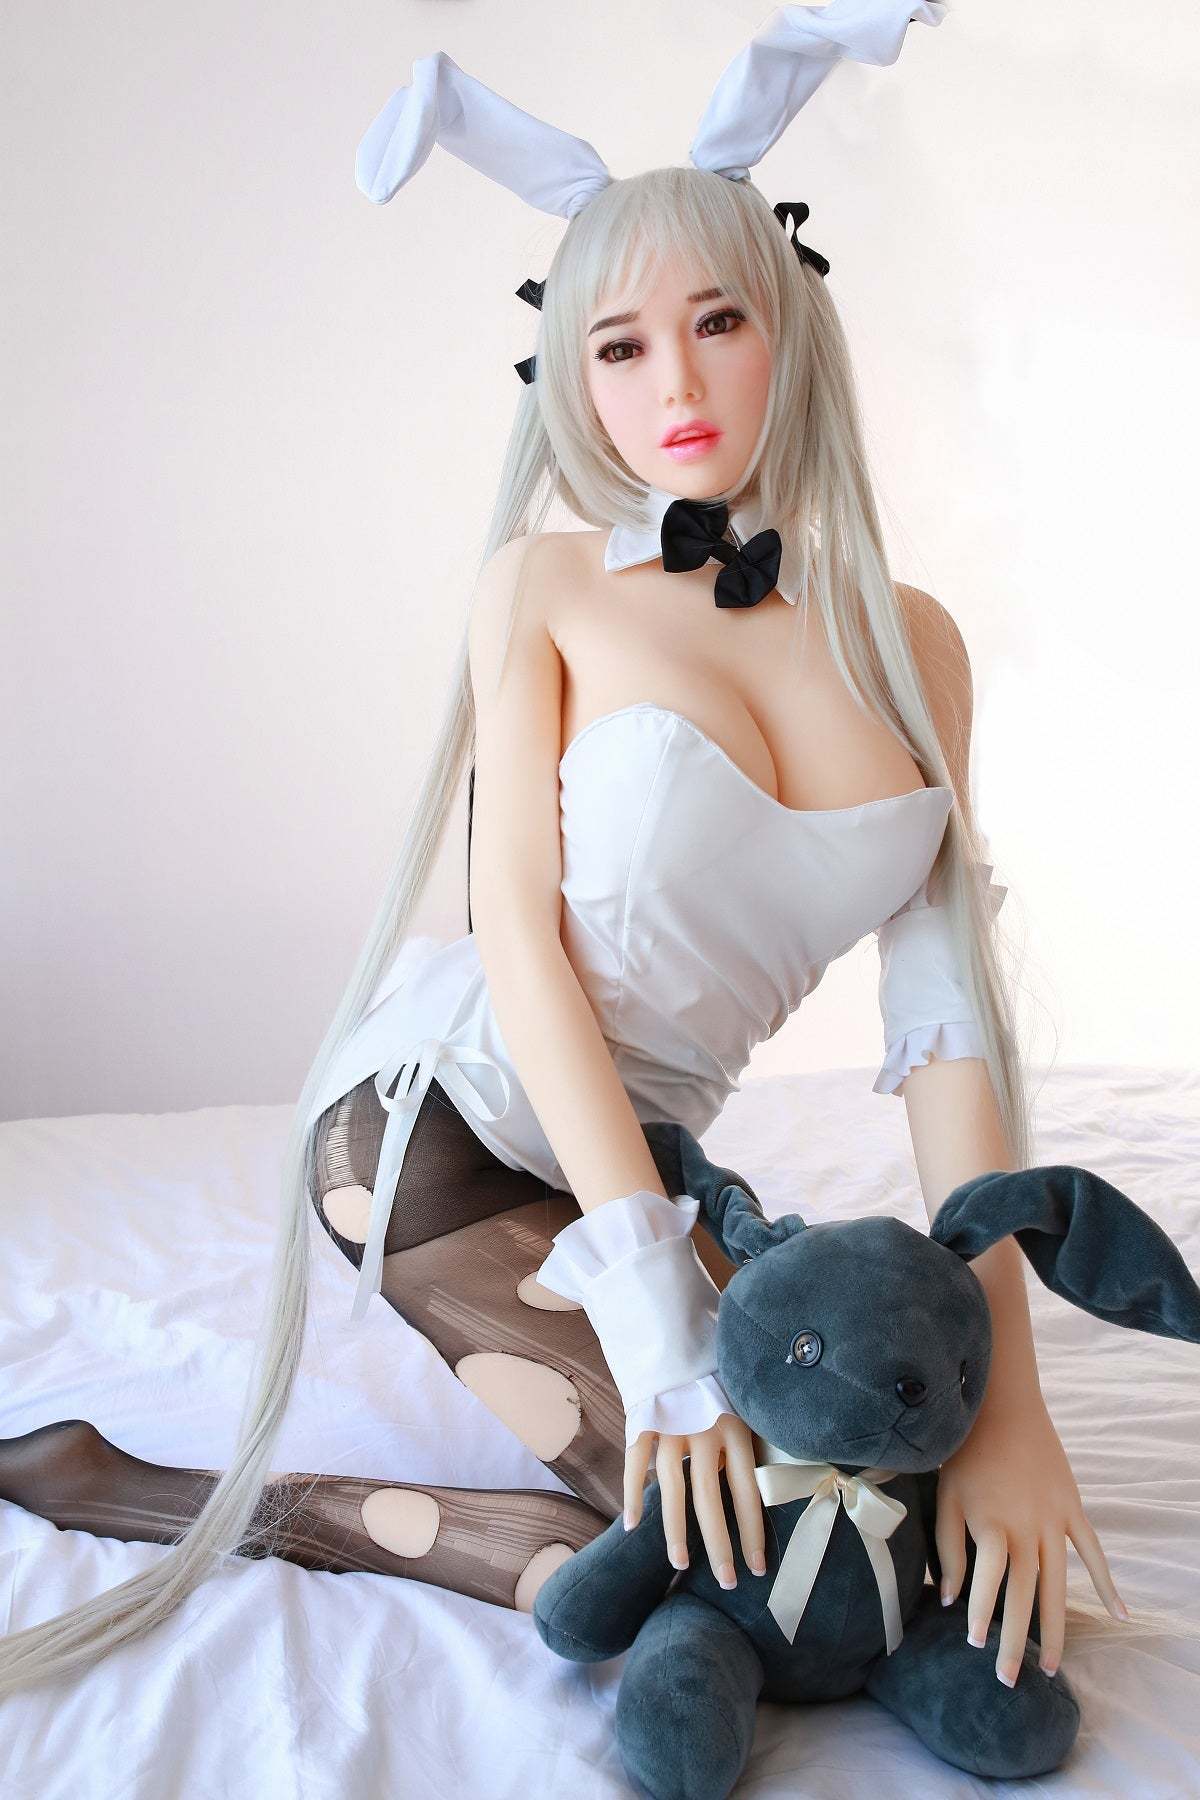 Denali - 5Ft2(158cm) Top Quality TPE Sex Doll With White Hair (In Stock EU)